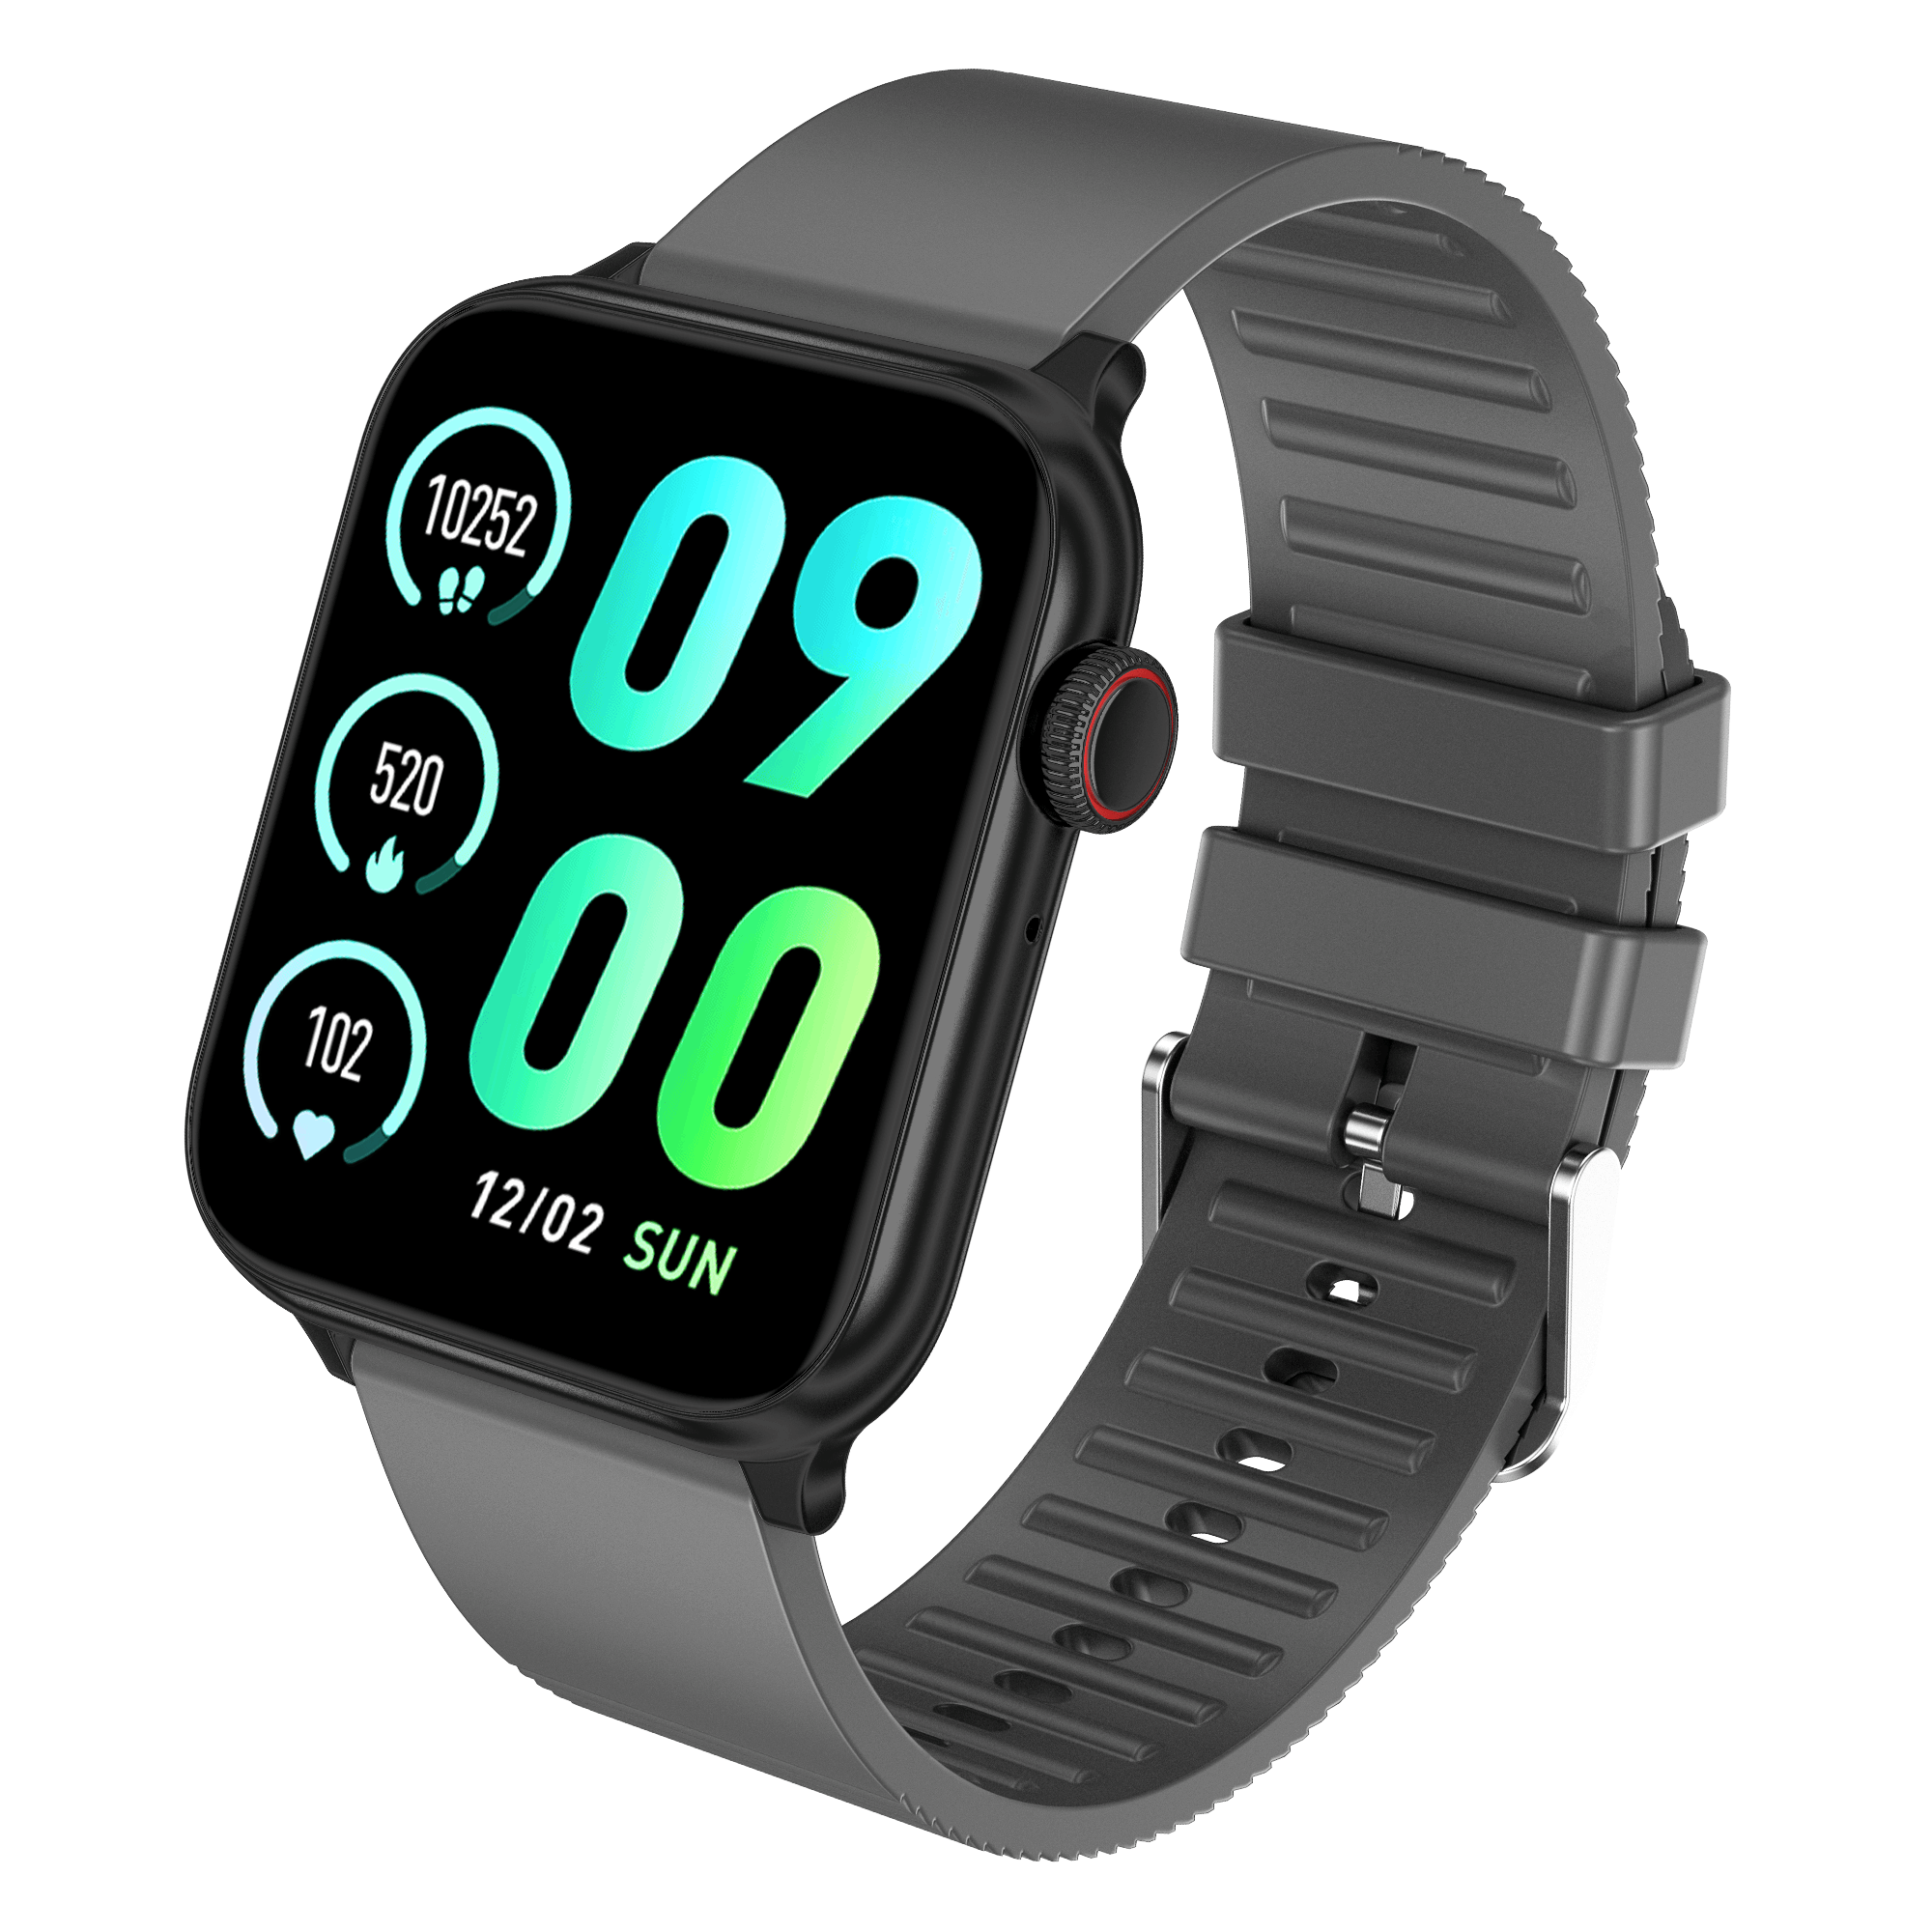 IZI Newly Launched Prime+ Smart Watch for Women, 1.78" AMOLED Display, BT Calling, DIY Watch Face Studio, Inbuilt Games, 200+ Sports Mode, Female Wellness, Menstrual Tracking, Sleep Monitor